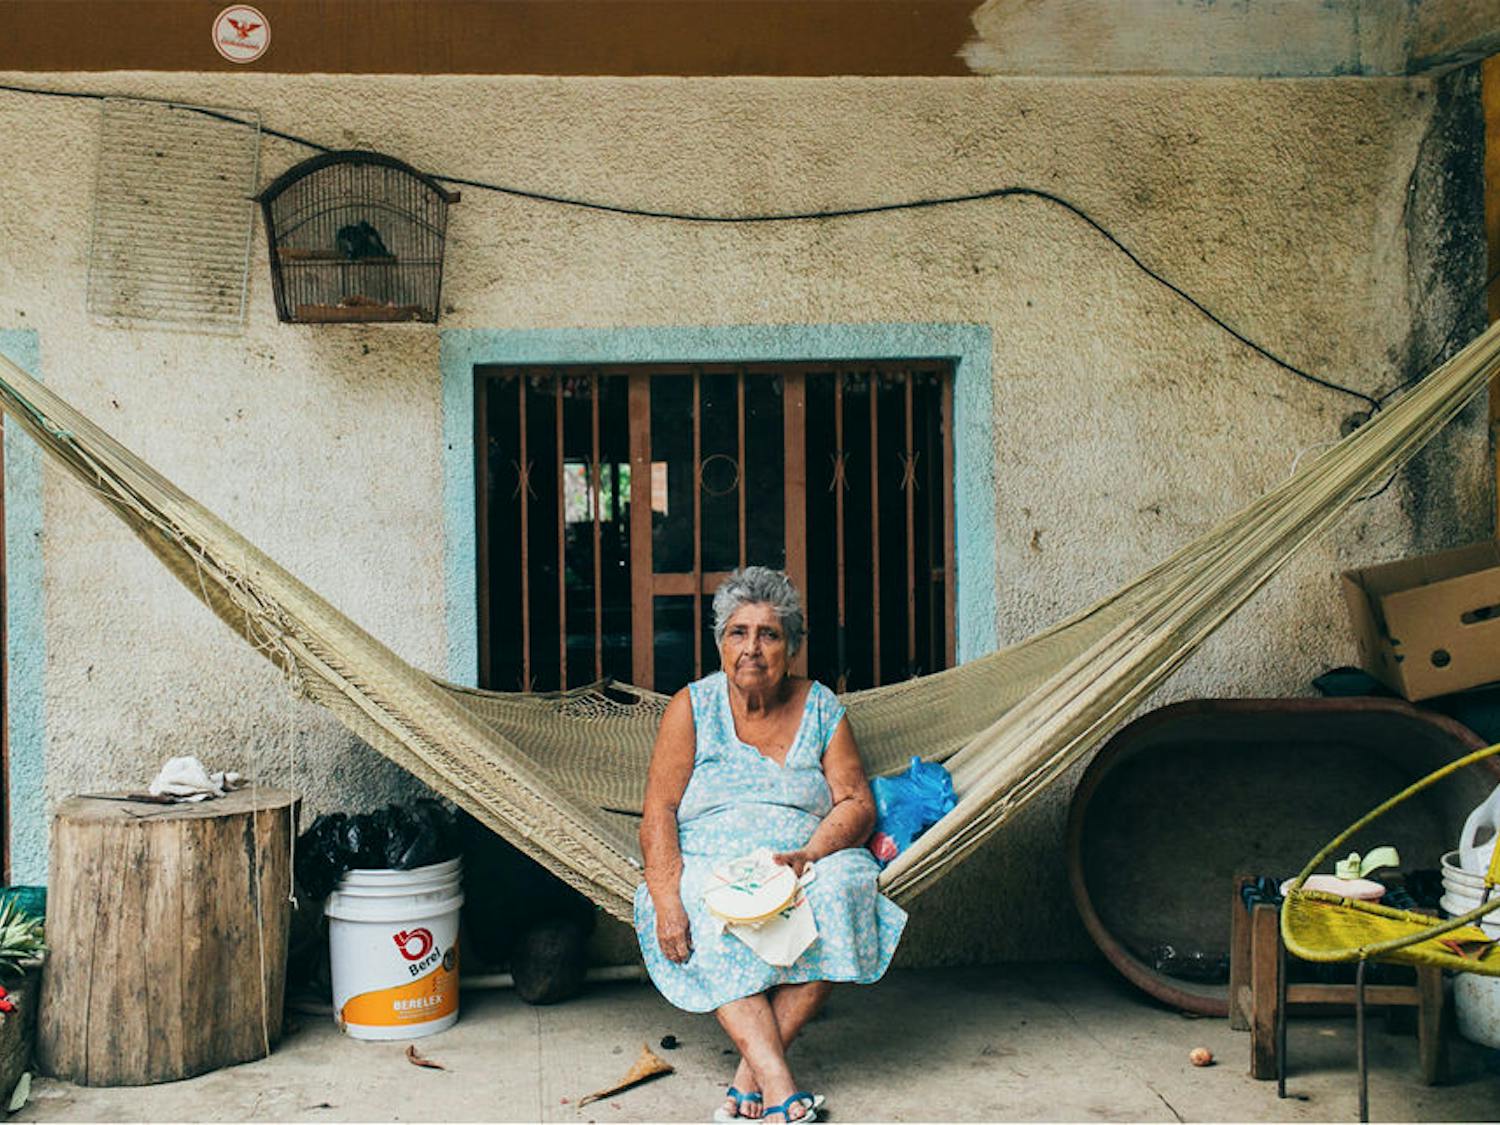 Miguel Cardona, a 23-year-old UF architecture senior, won first place in the University of Florida’s International Center’s 2015 Global Culture Photo contest with this photo of a woman in Sayulita, Mexico.